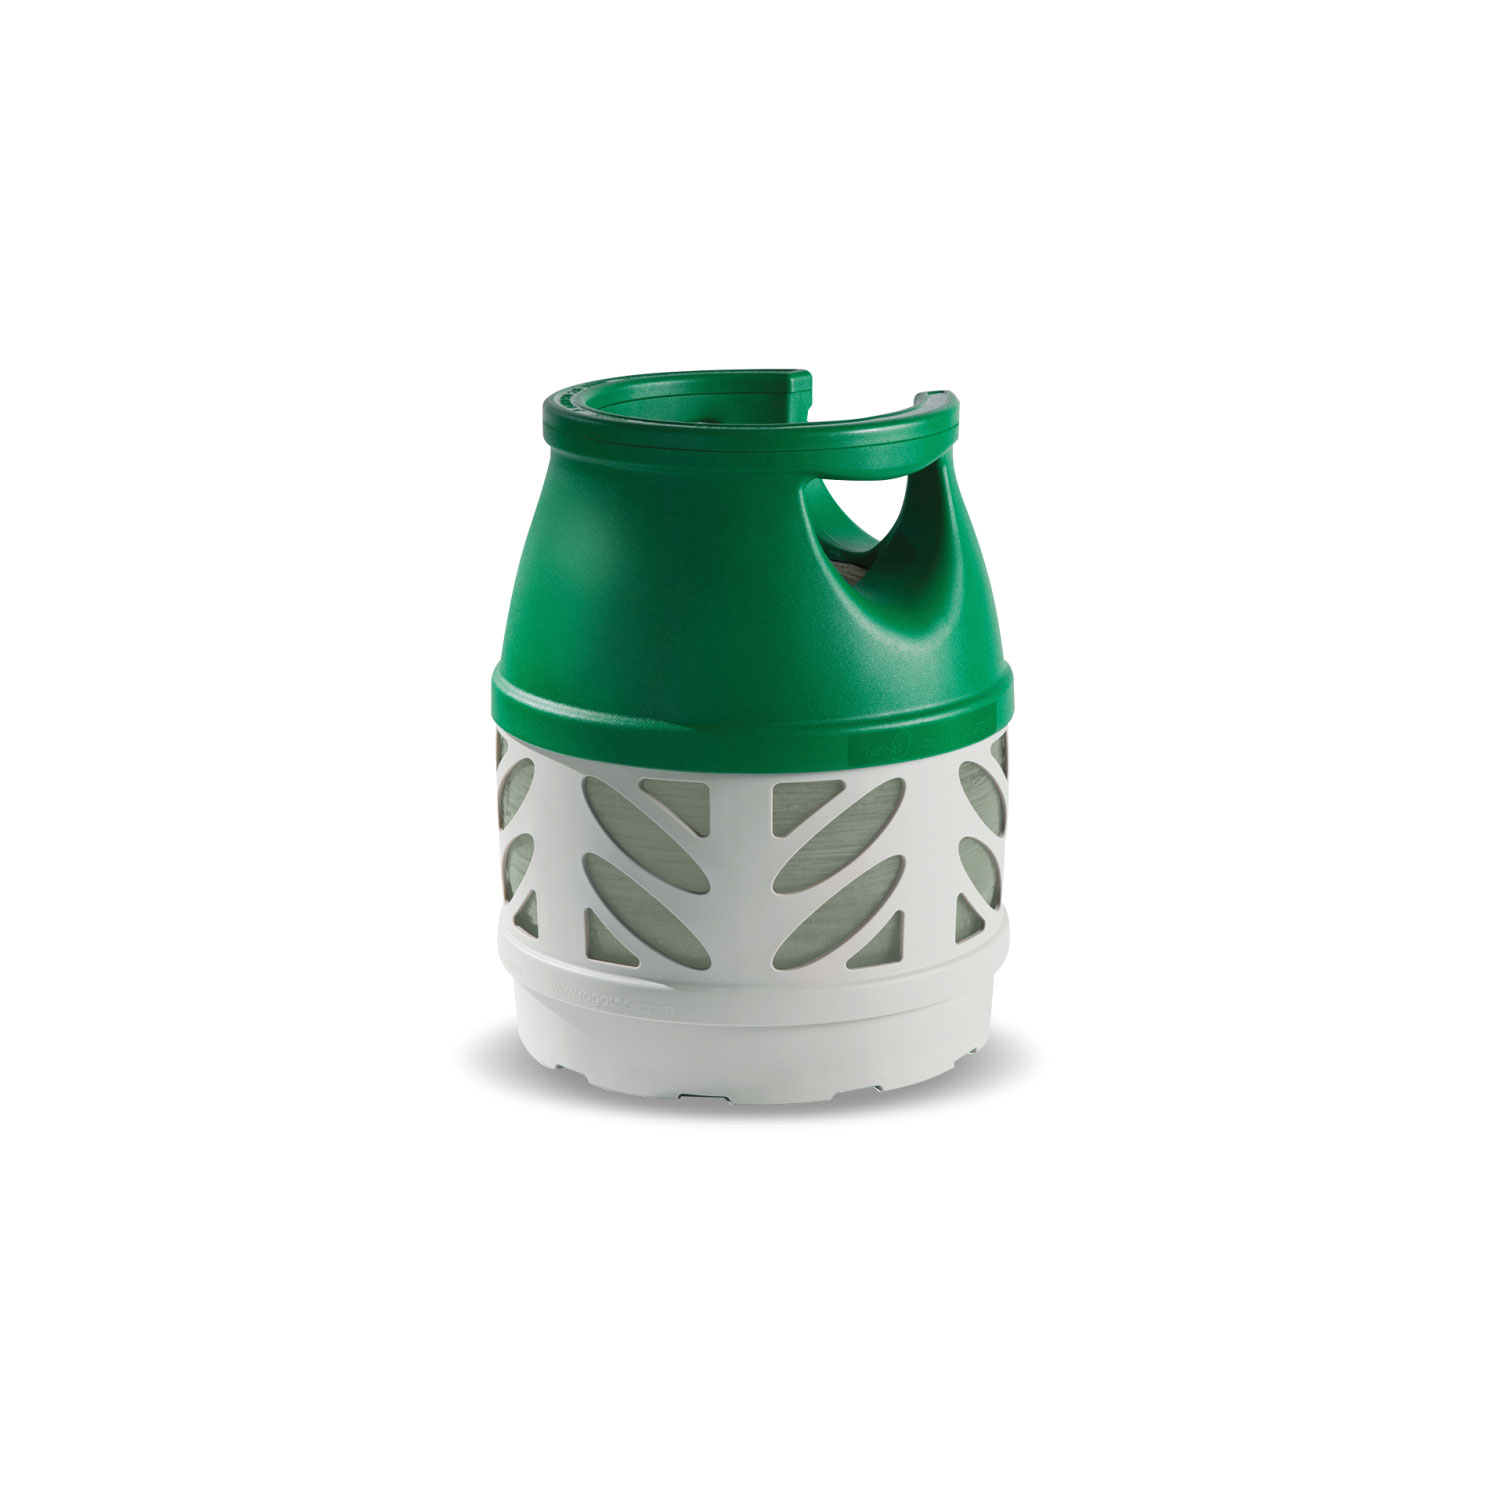 Plastic Propane 5kg Gaslight gas bottle - available from GSS